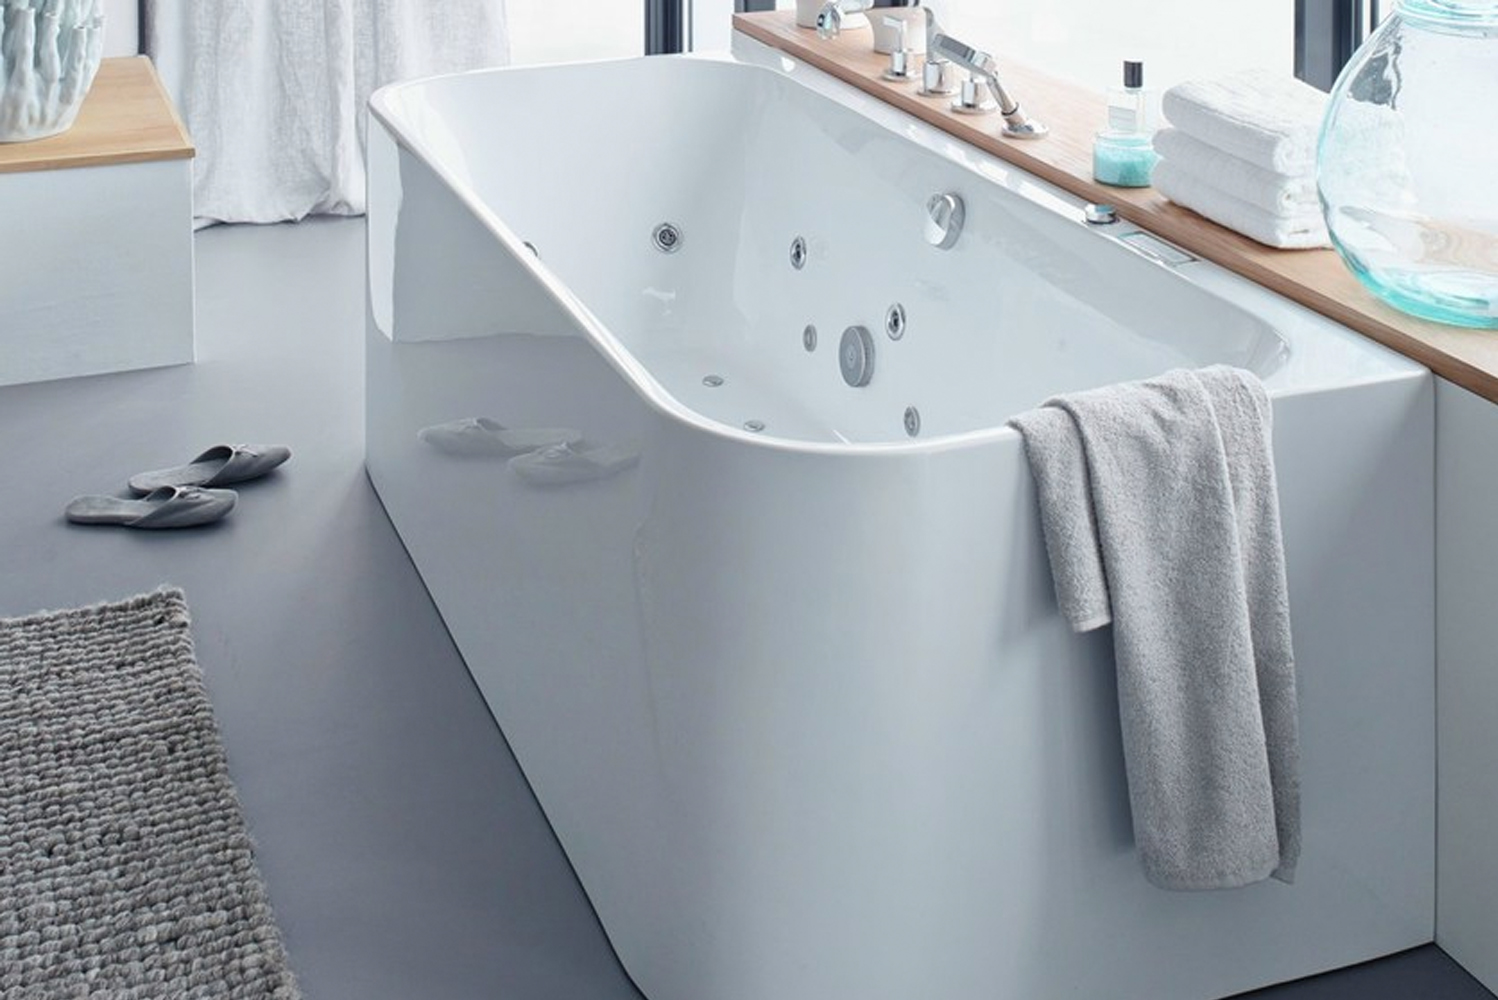 Duravit launched Happy D2 a complete bathroom solution designed by Sieger Design 